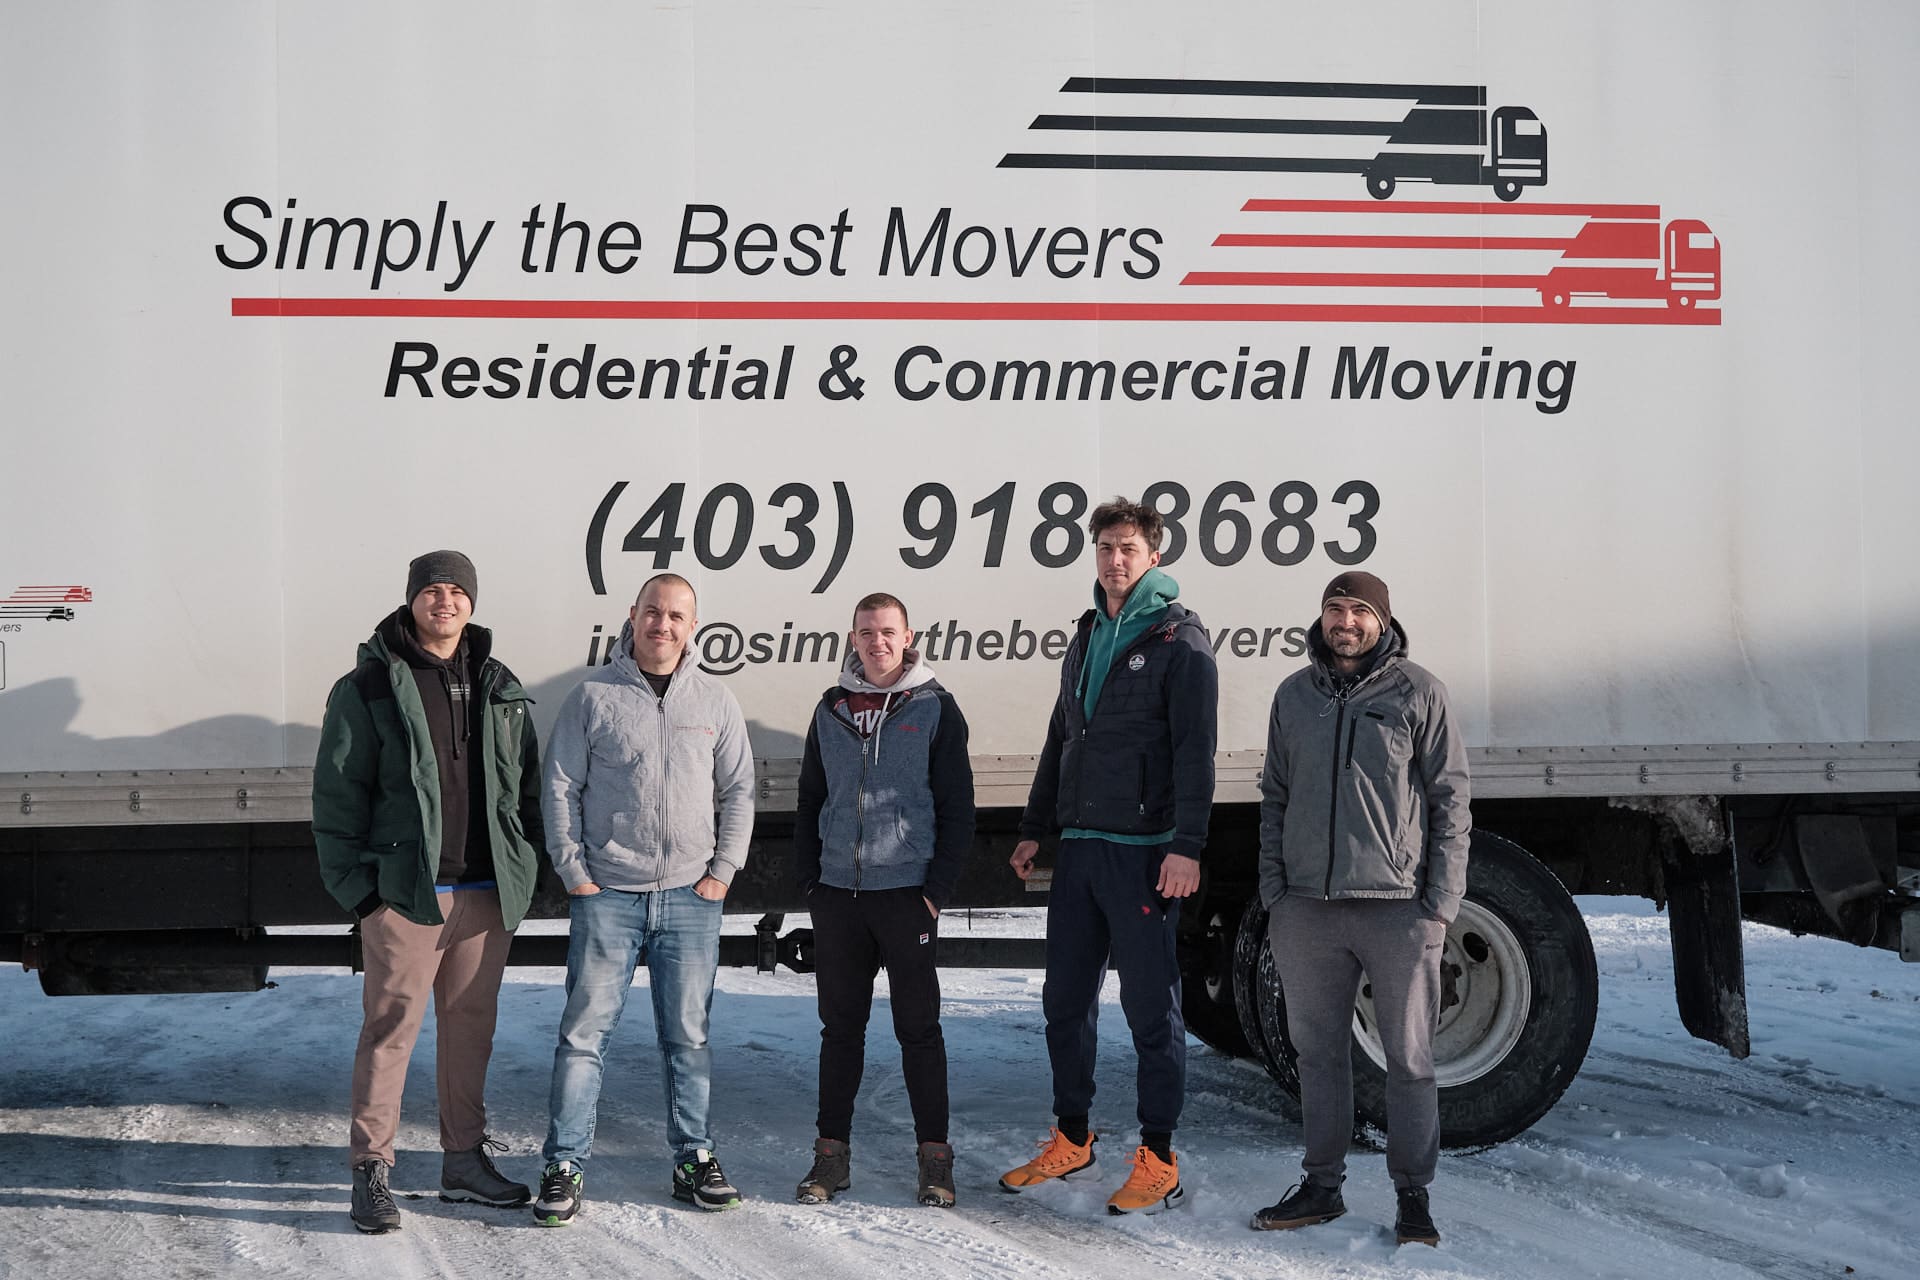 Lethbridge movers standing in front of a moving truck